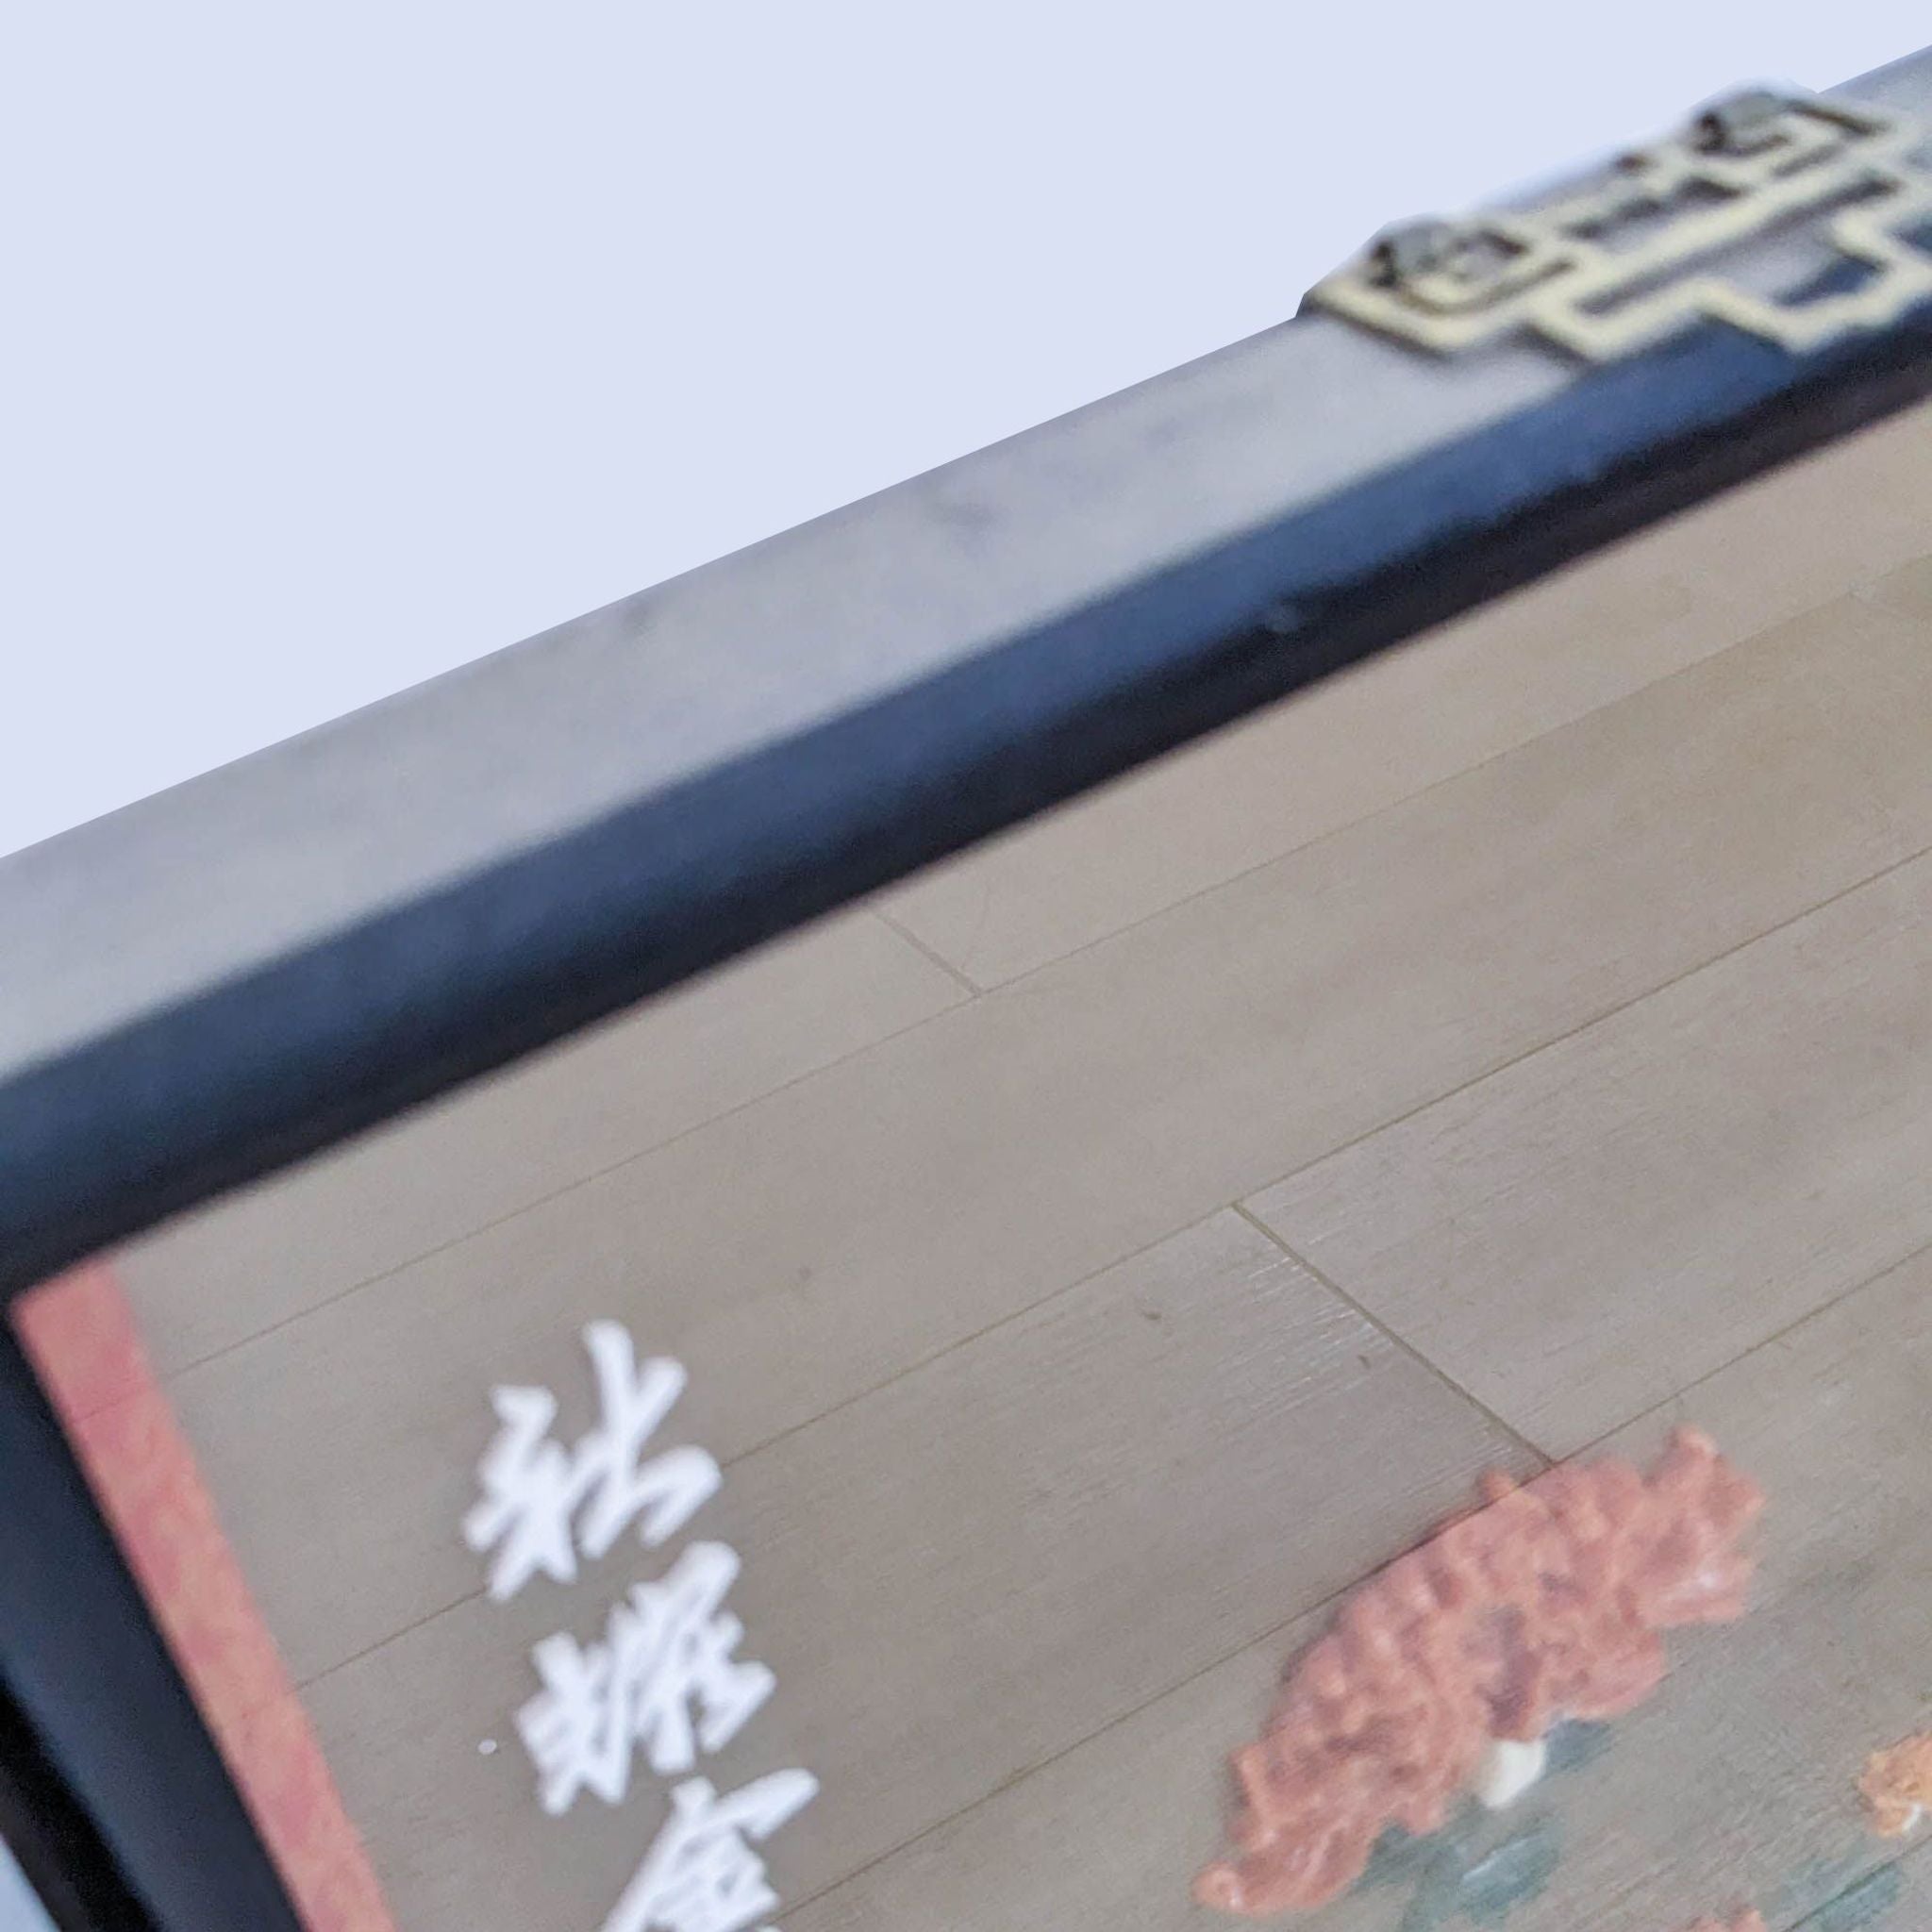 Image 2: Close-up of framed collage's edge, displaying intricate design details and Chinese text, part of Reperch's floral art series.